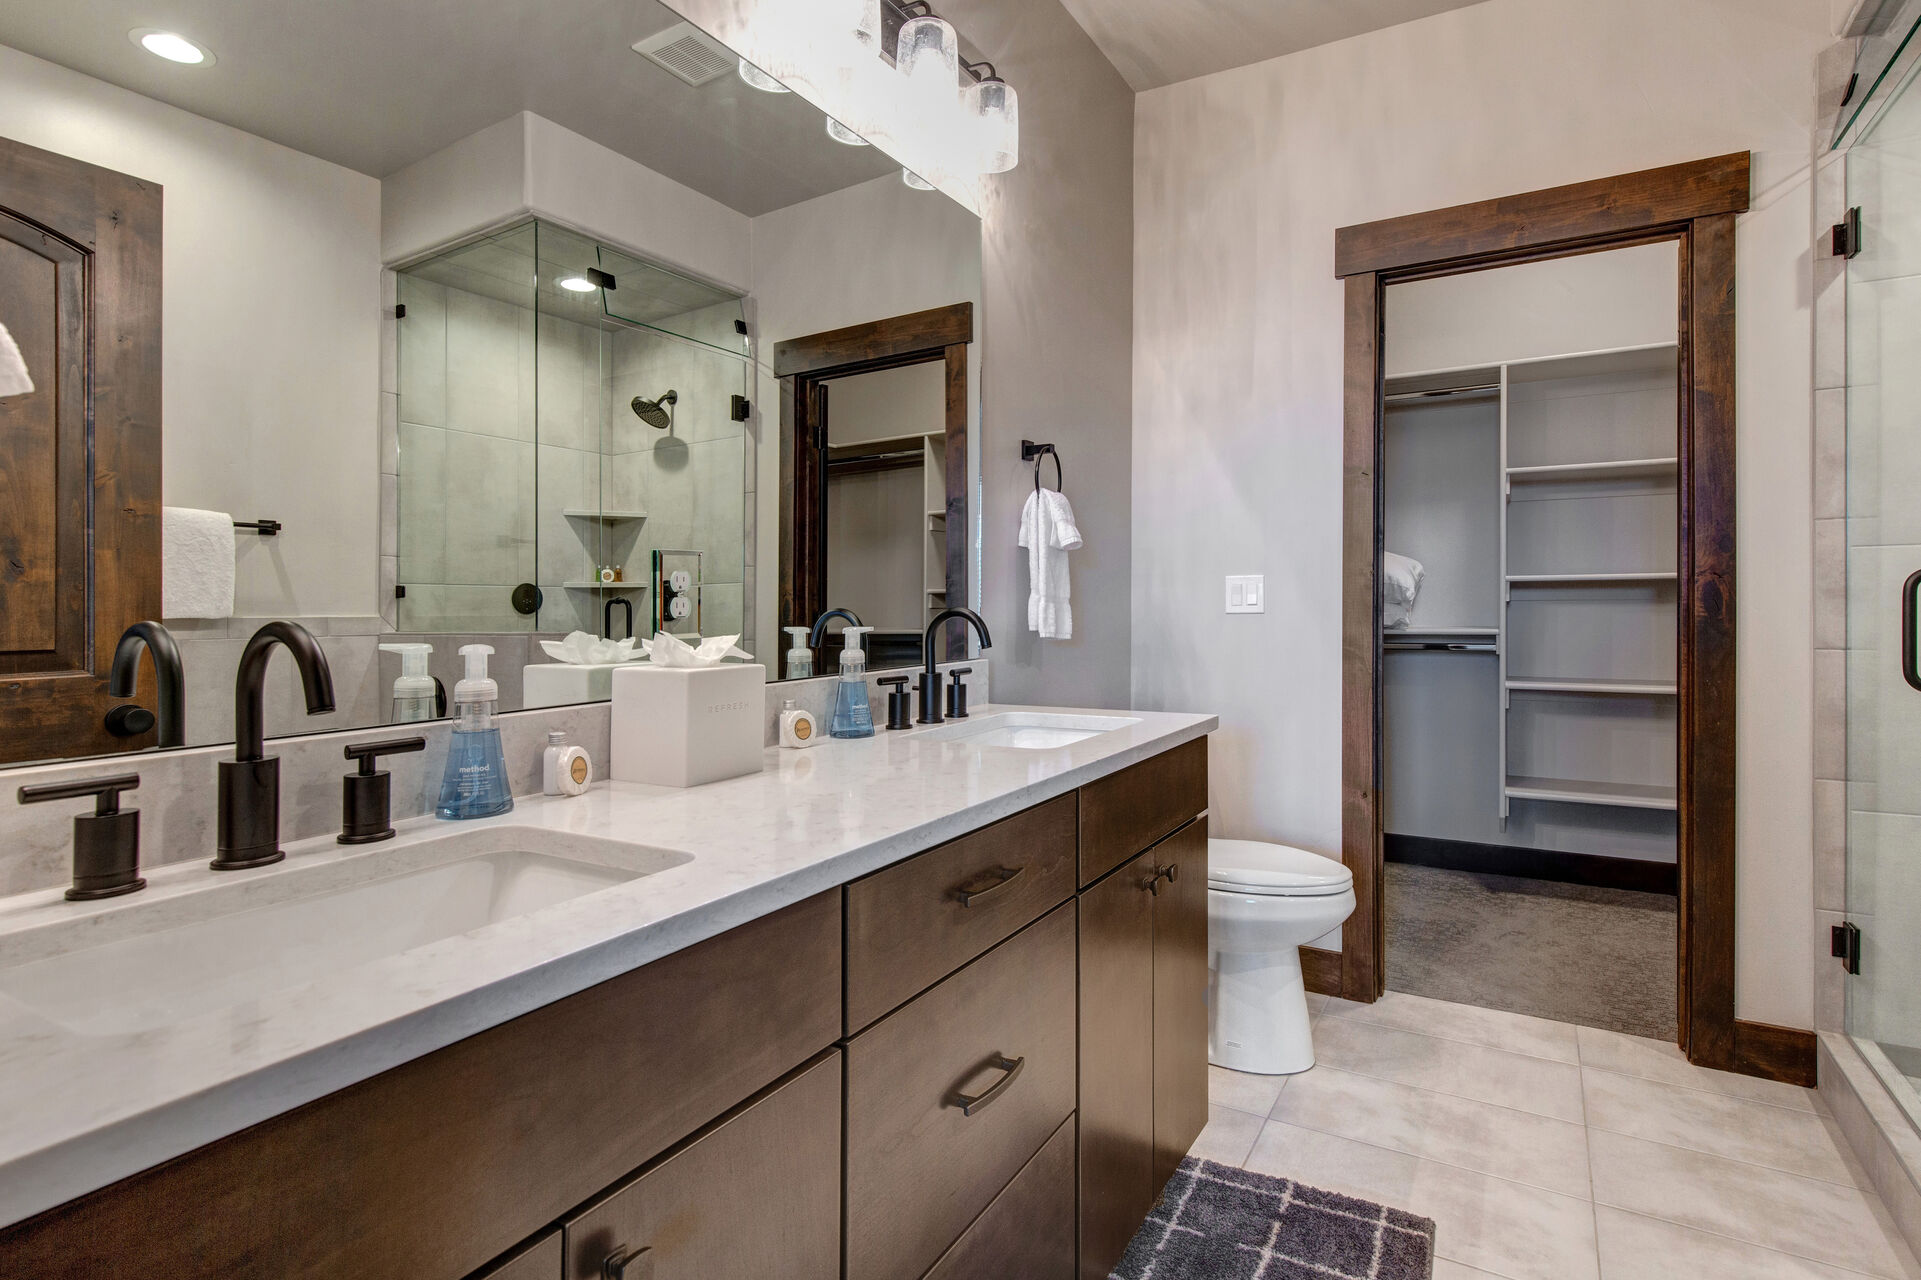 Master Bathroom with walk-in closet, dual sinks, large tiled shower, and separate soaking tub